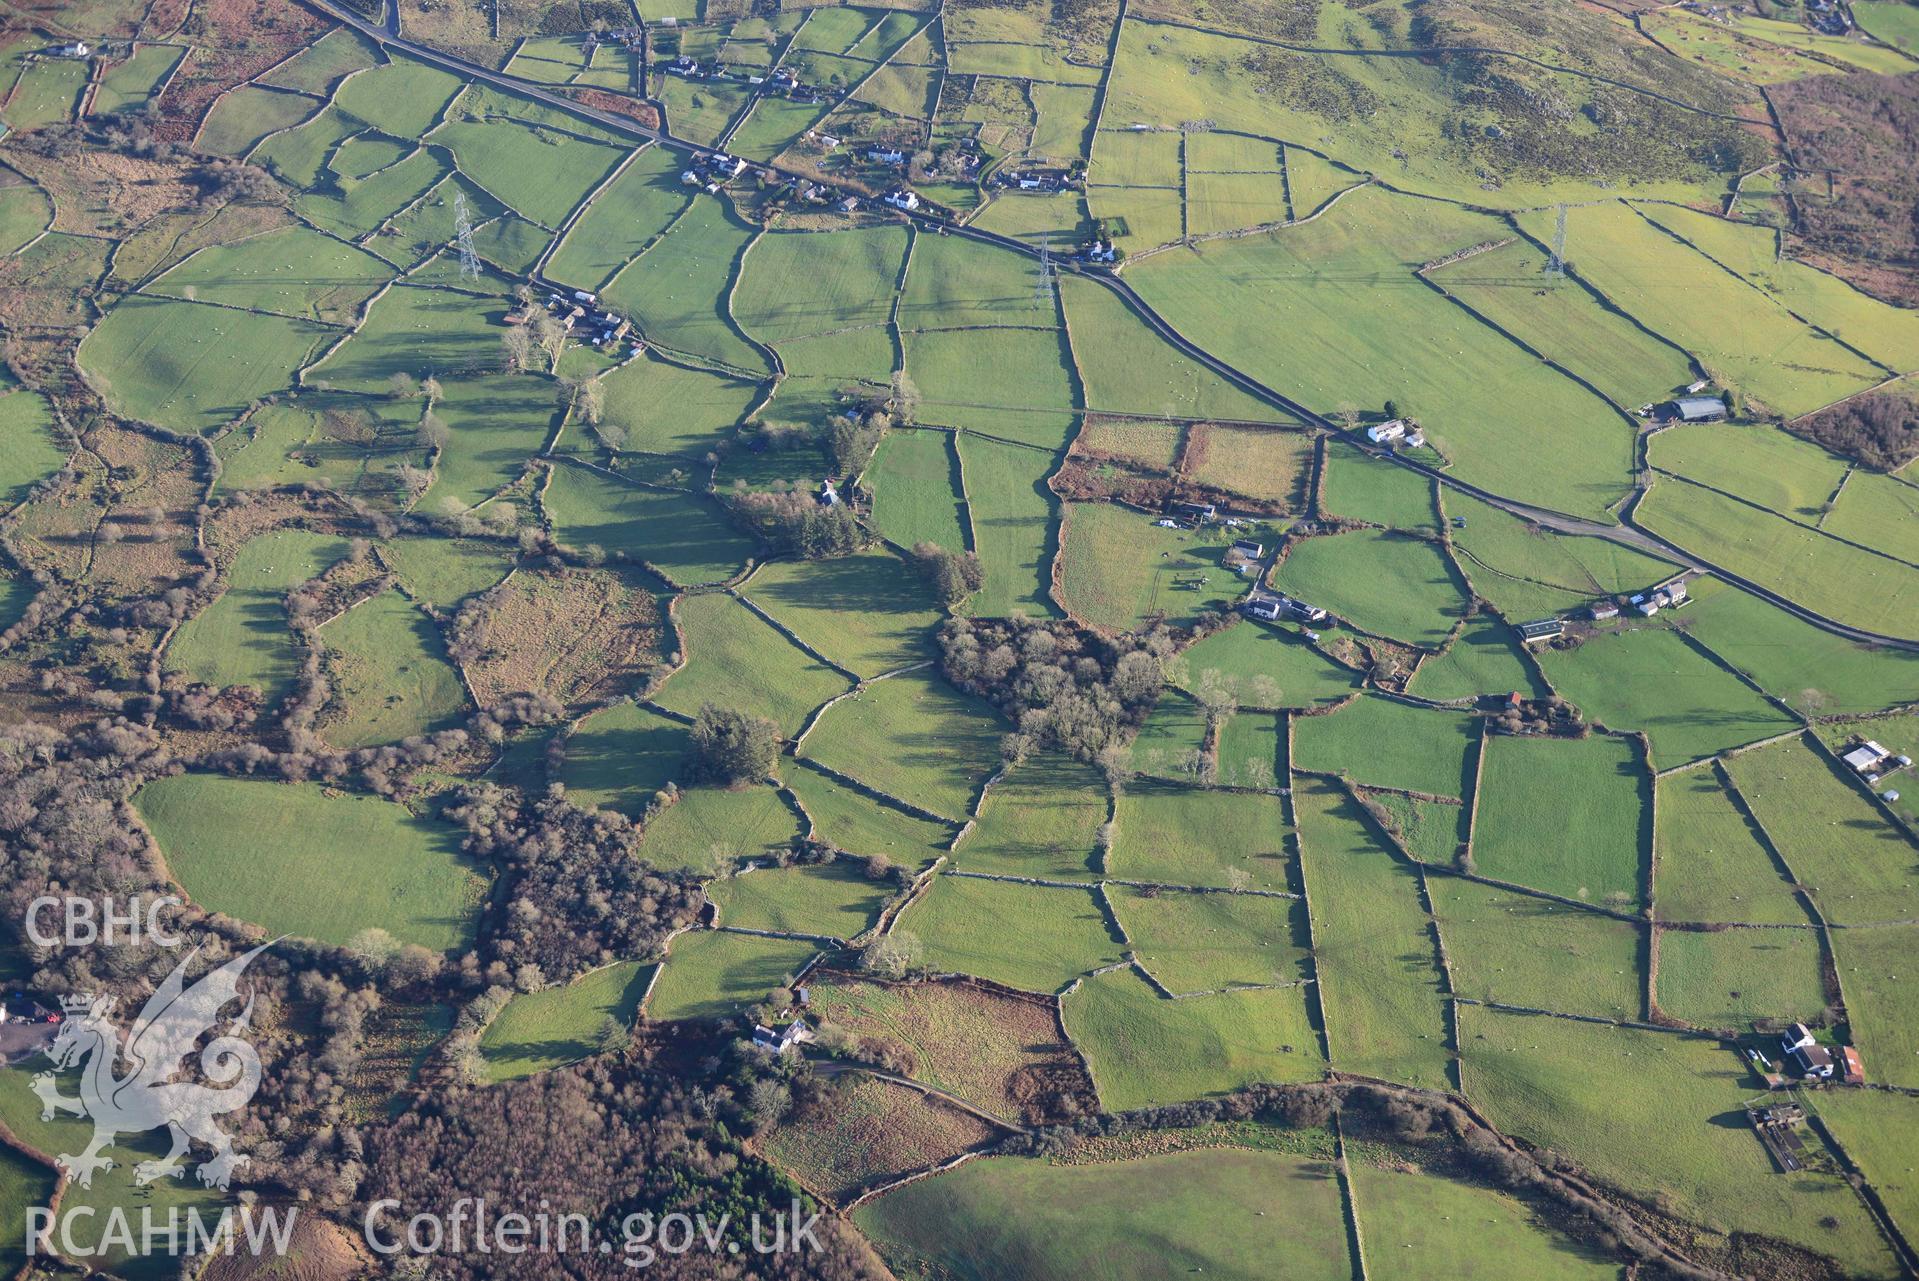 Oblique aerial photograph of Penygroes landscape, with settlement enclosure, Llwyn Du; west of Pen-yr-allt taken from north west during the Royal Commission